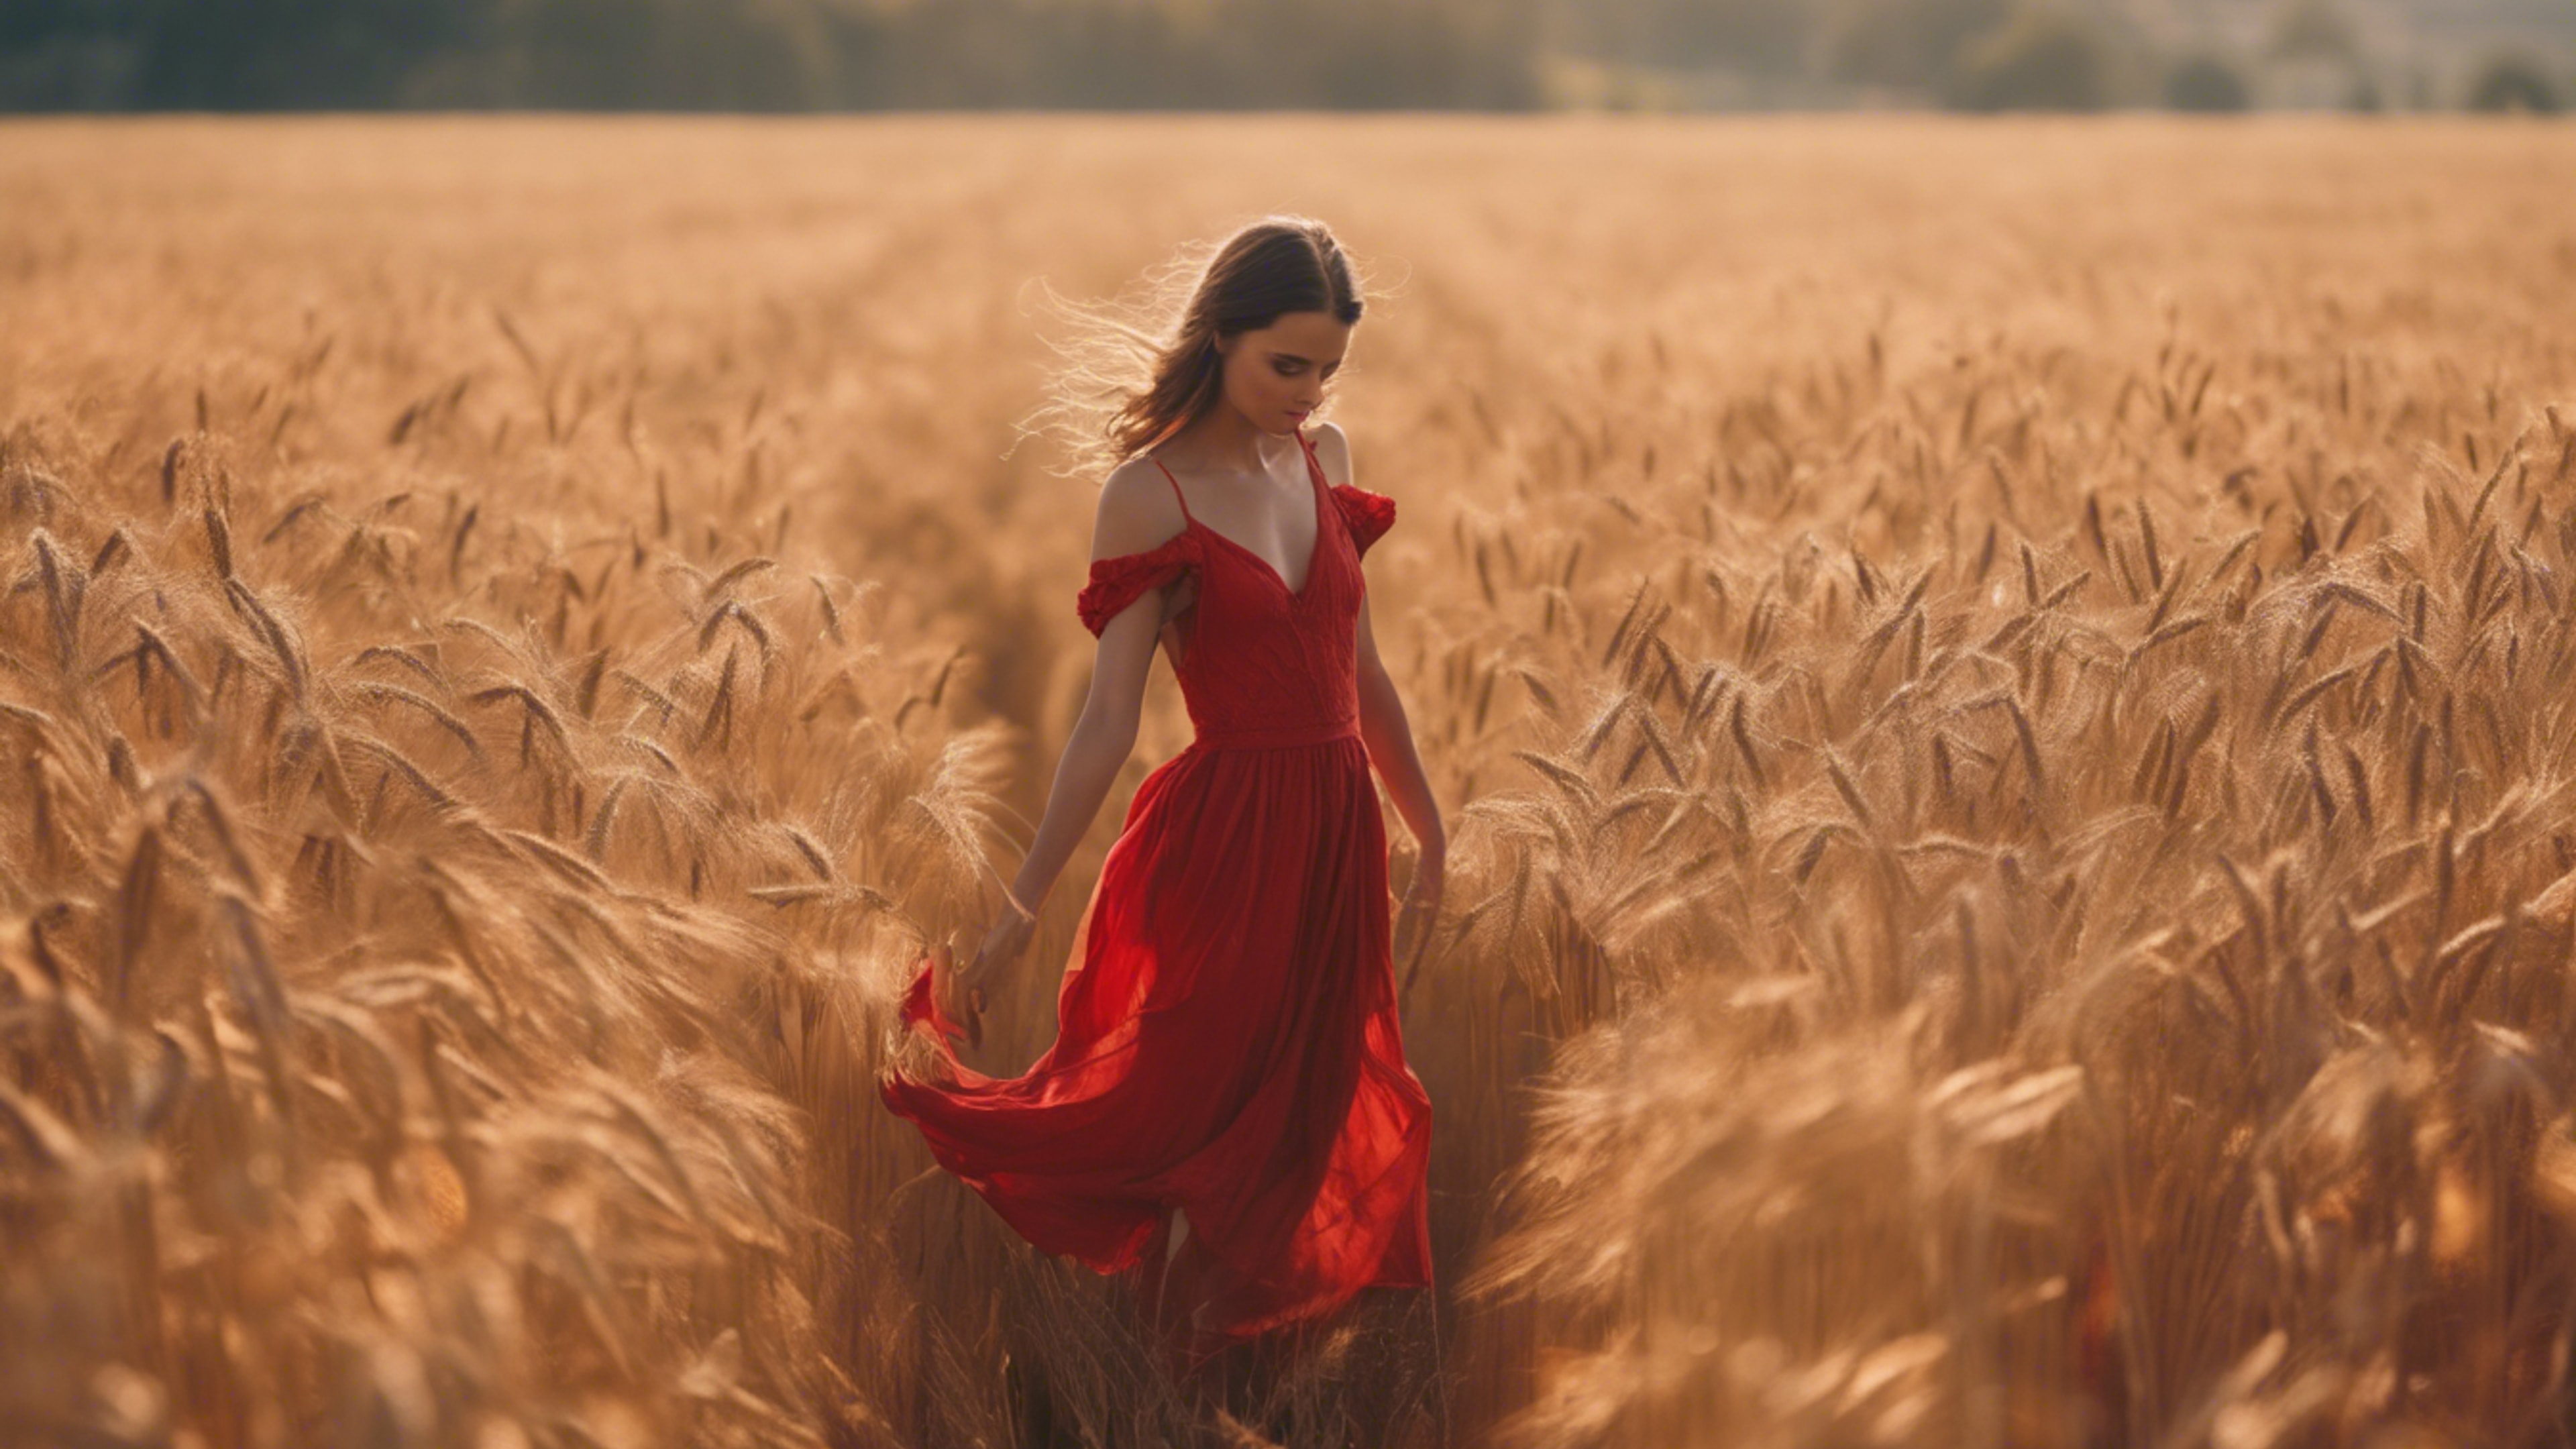 A young girl in a fiery red dress dancing in a golden wheat field.壁紙[3d2bbc59672c41dea075]